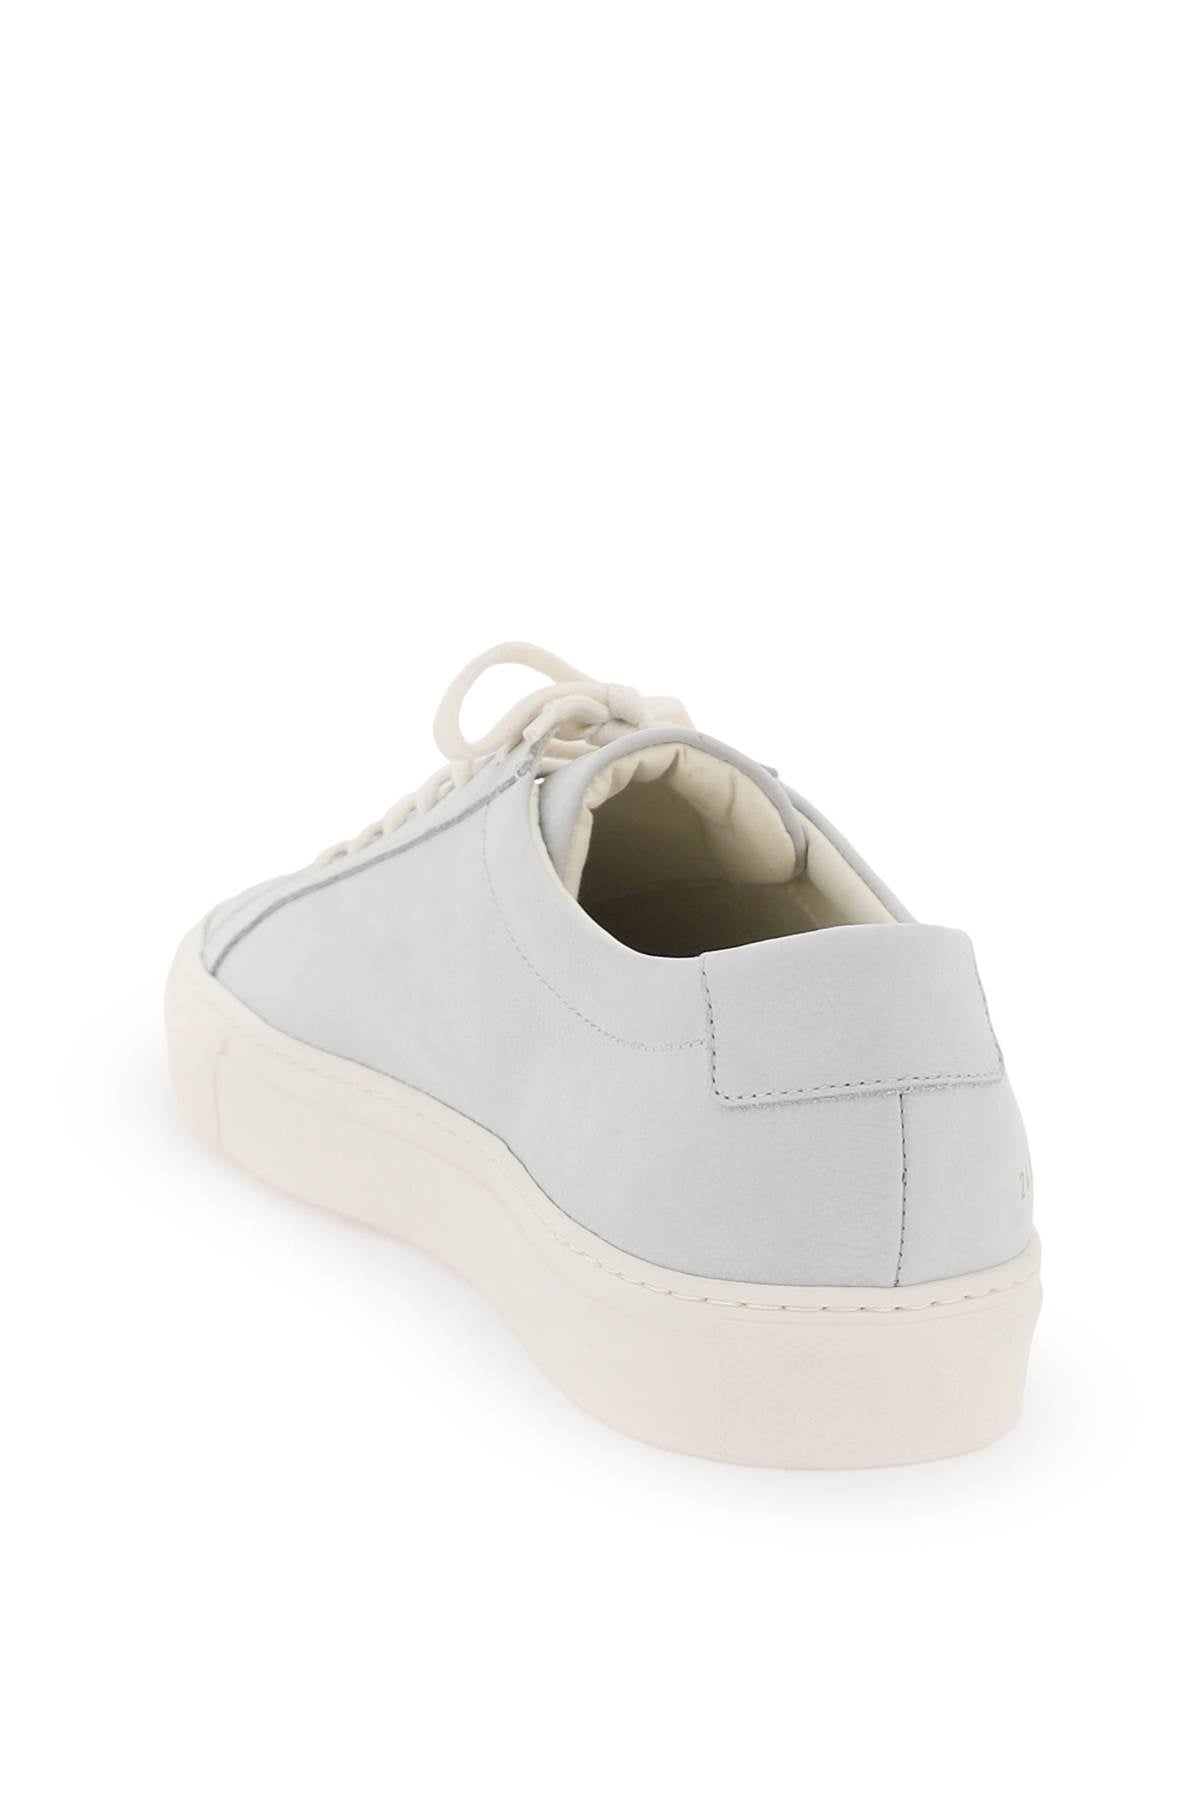 Common projects original achilles leather sneakers-2